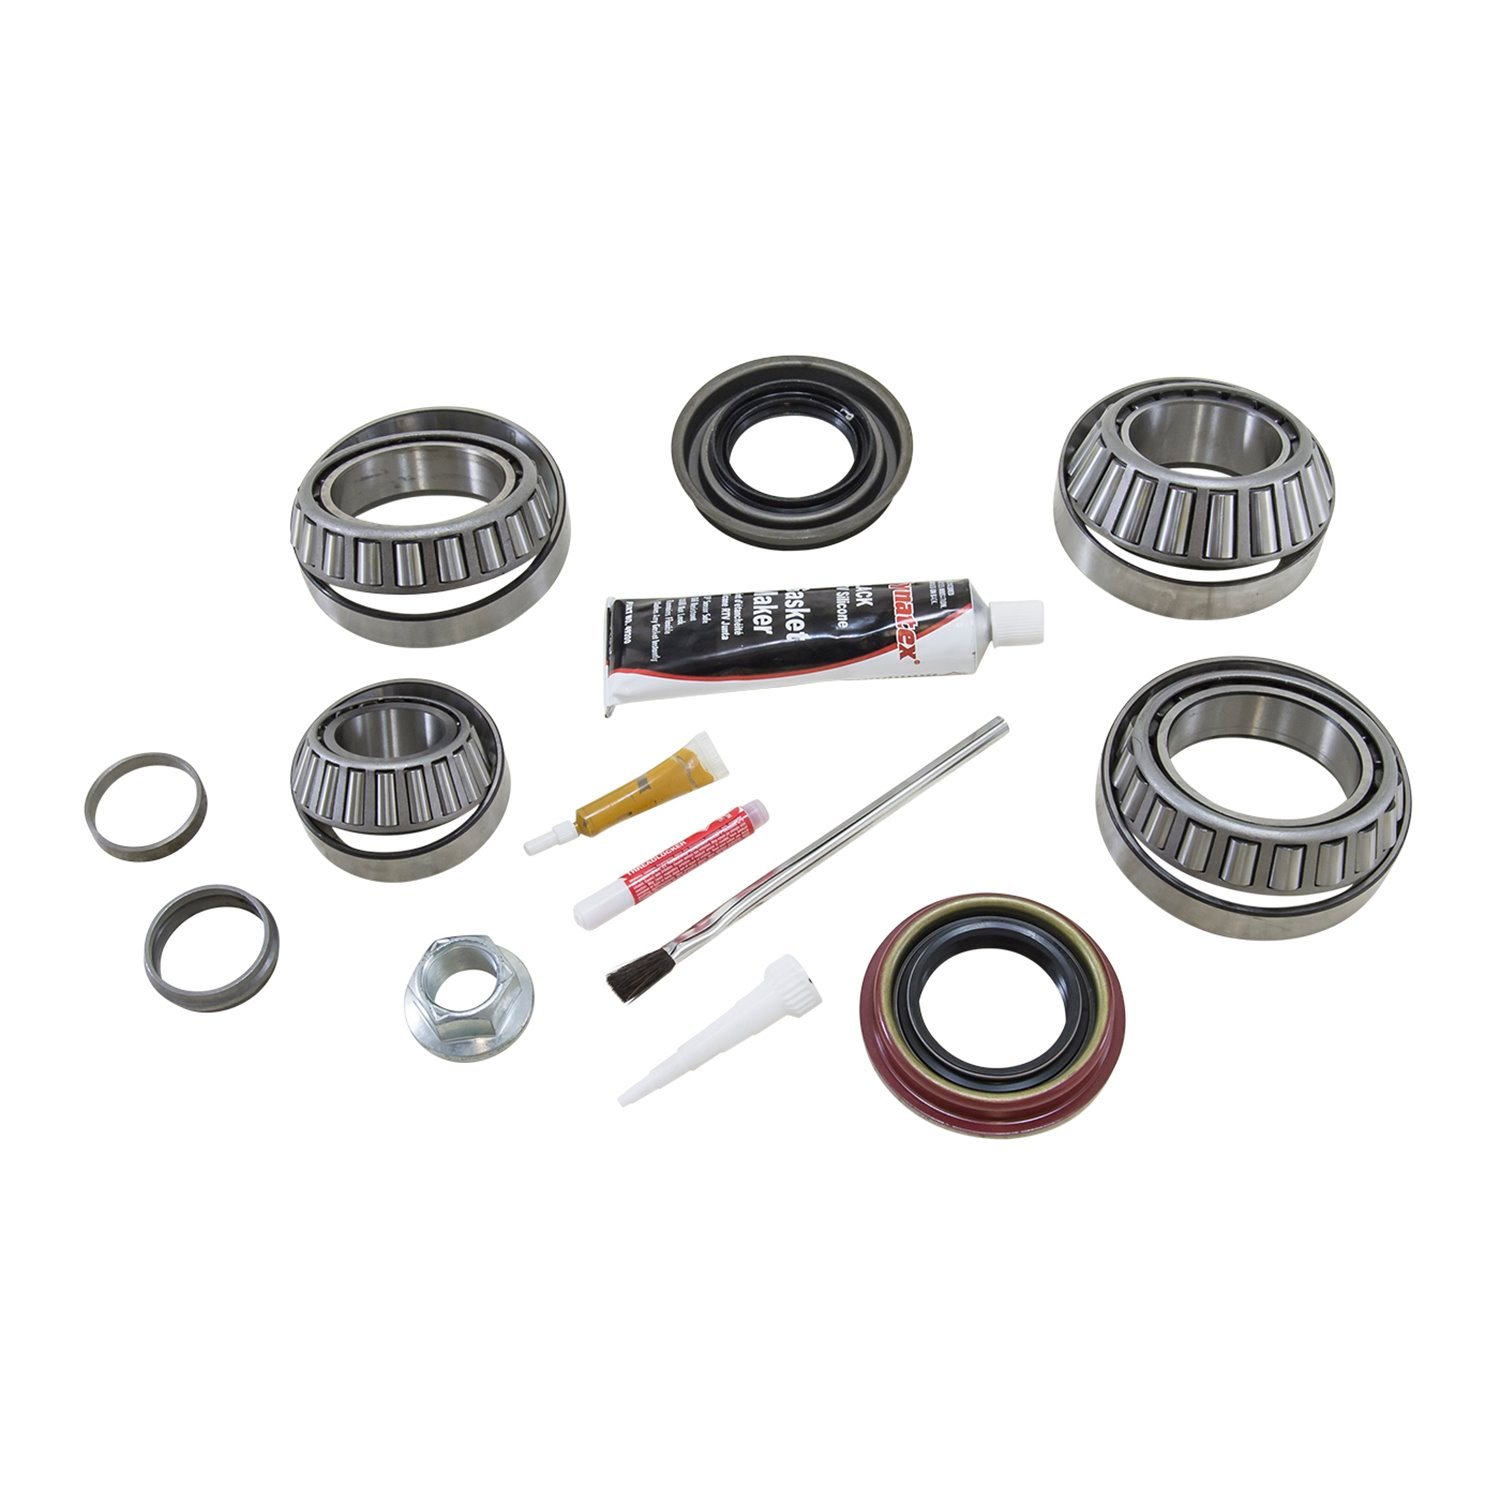 Bearing Install Kit For '00-'07 Ford 9.75 in. Diff W/ '11-Up Ring & Pinion